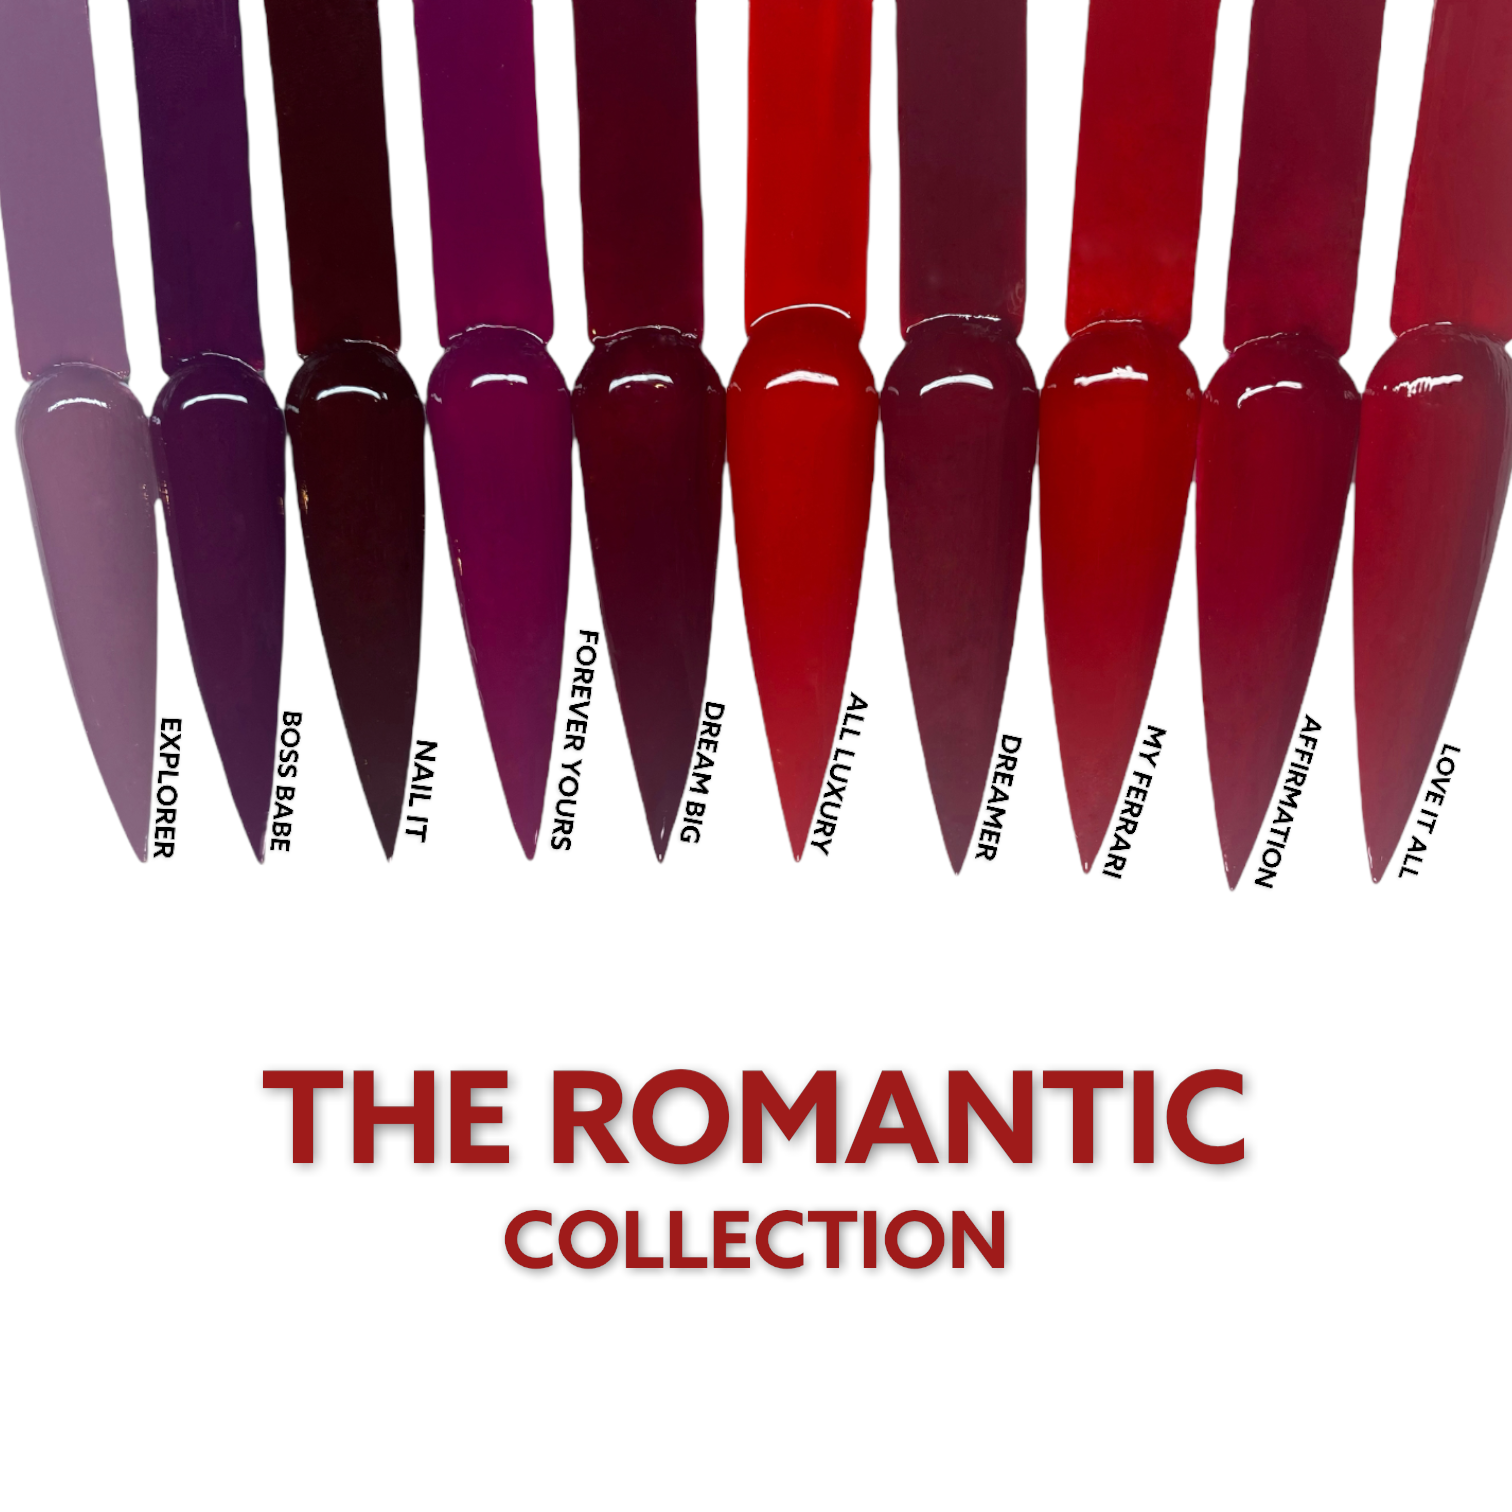 The Romantic Collection